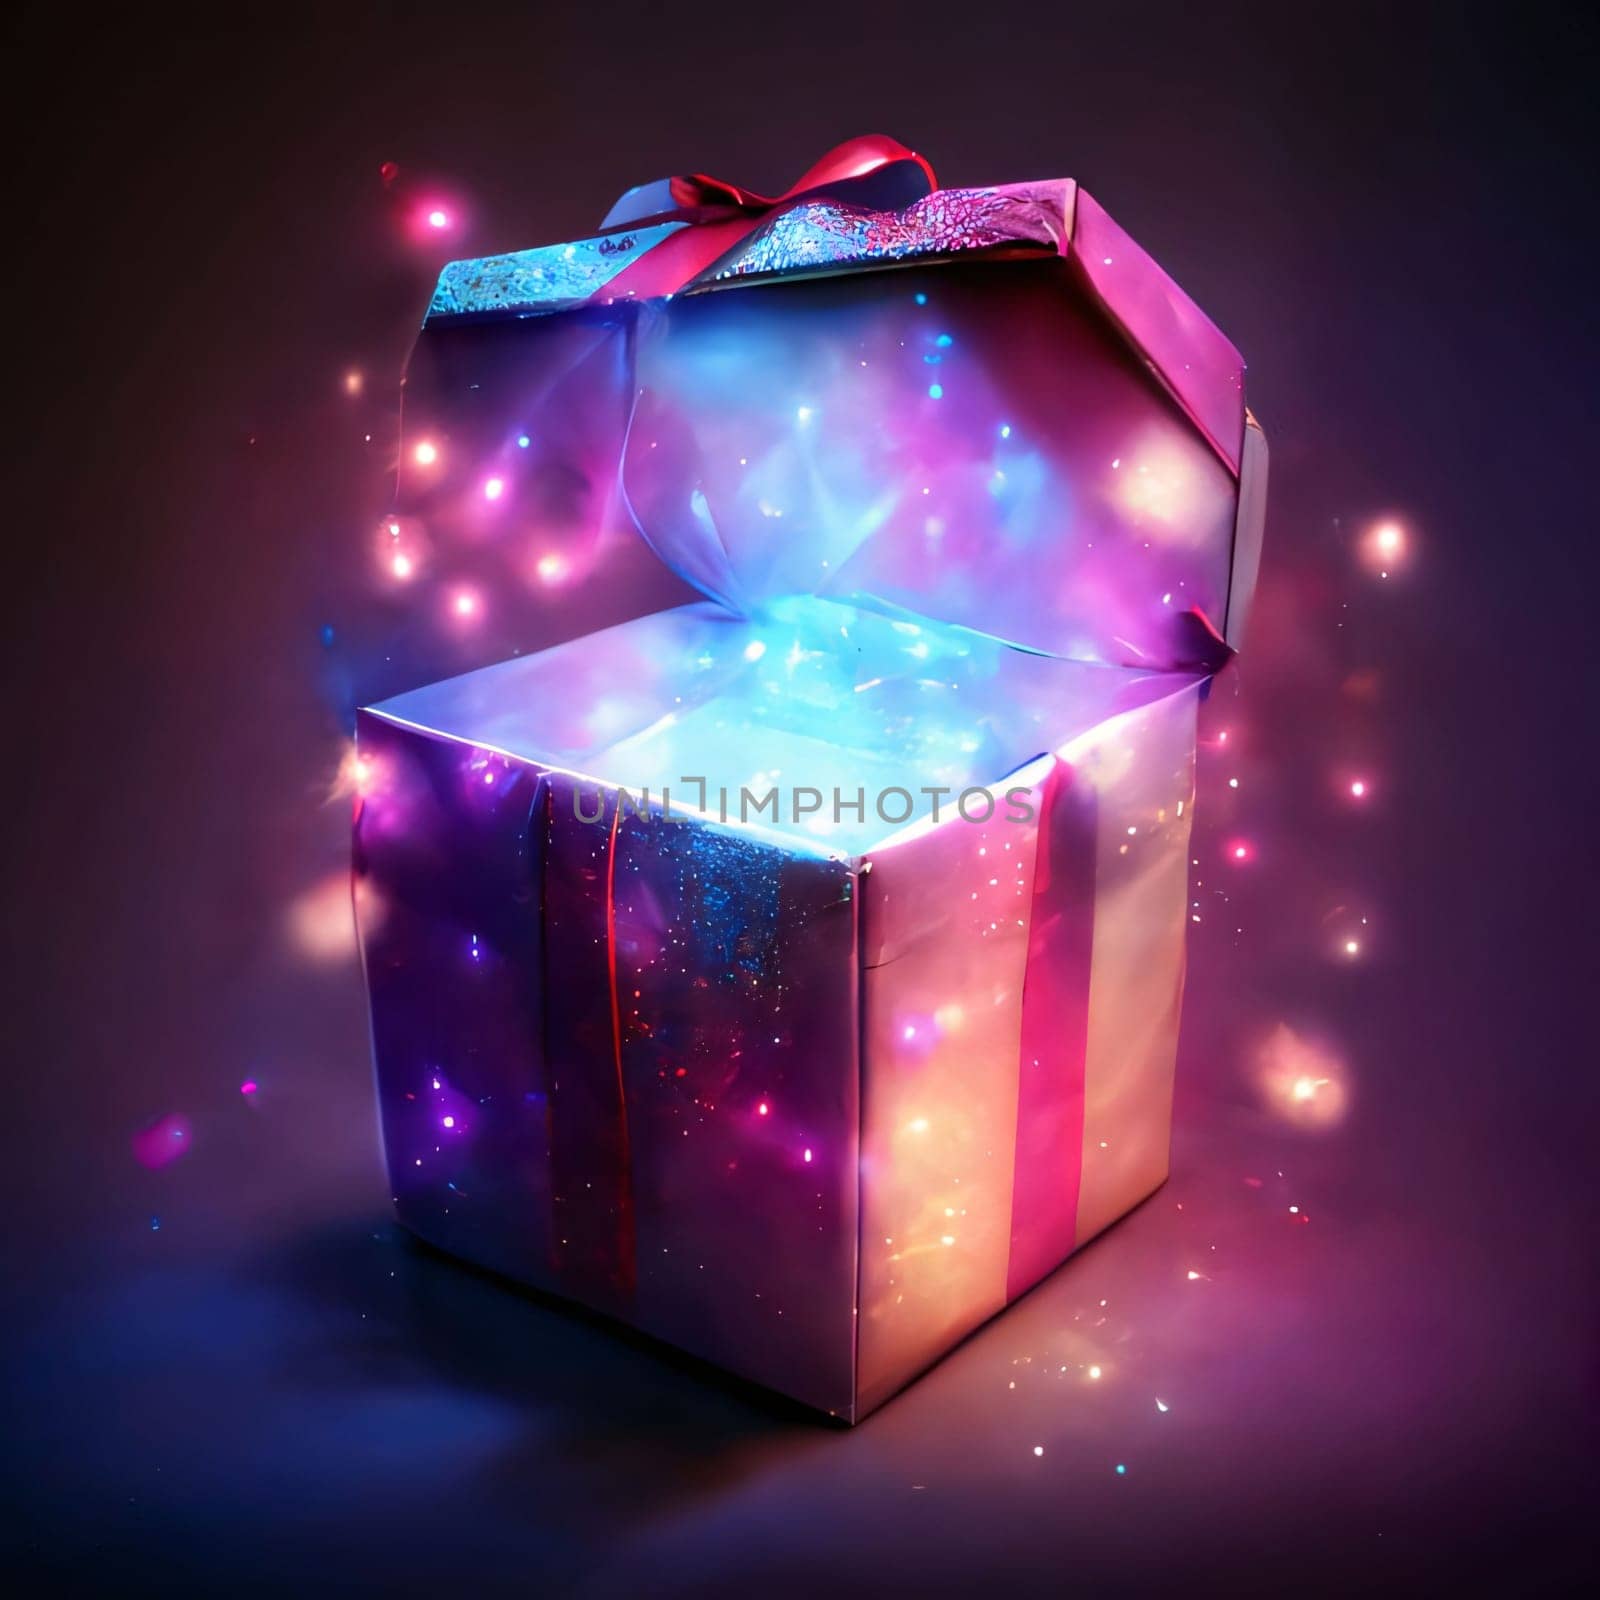 Open box, gift with light from inside. Gifts as a day symbol of present and love. A time of falling in love and love.